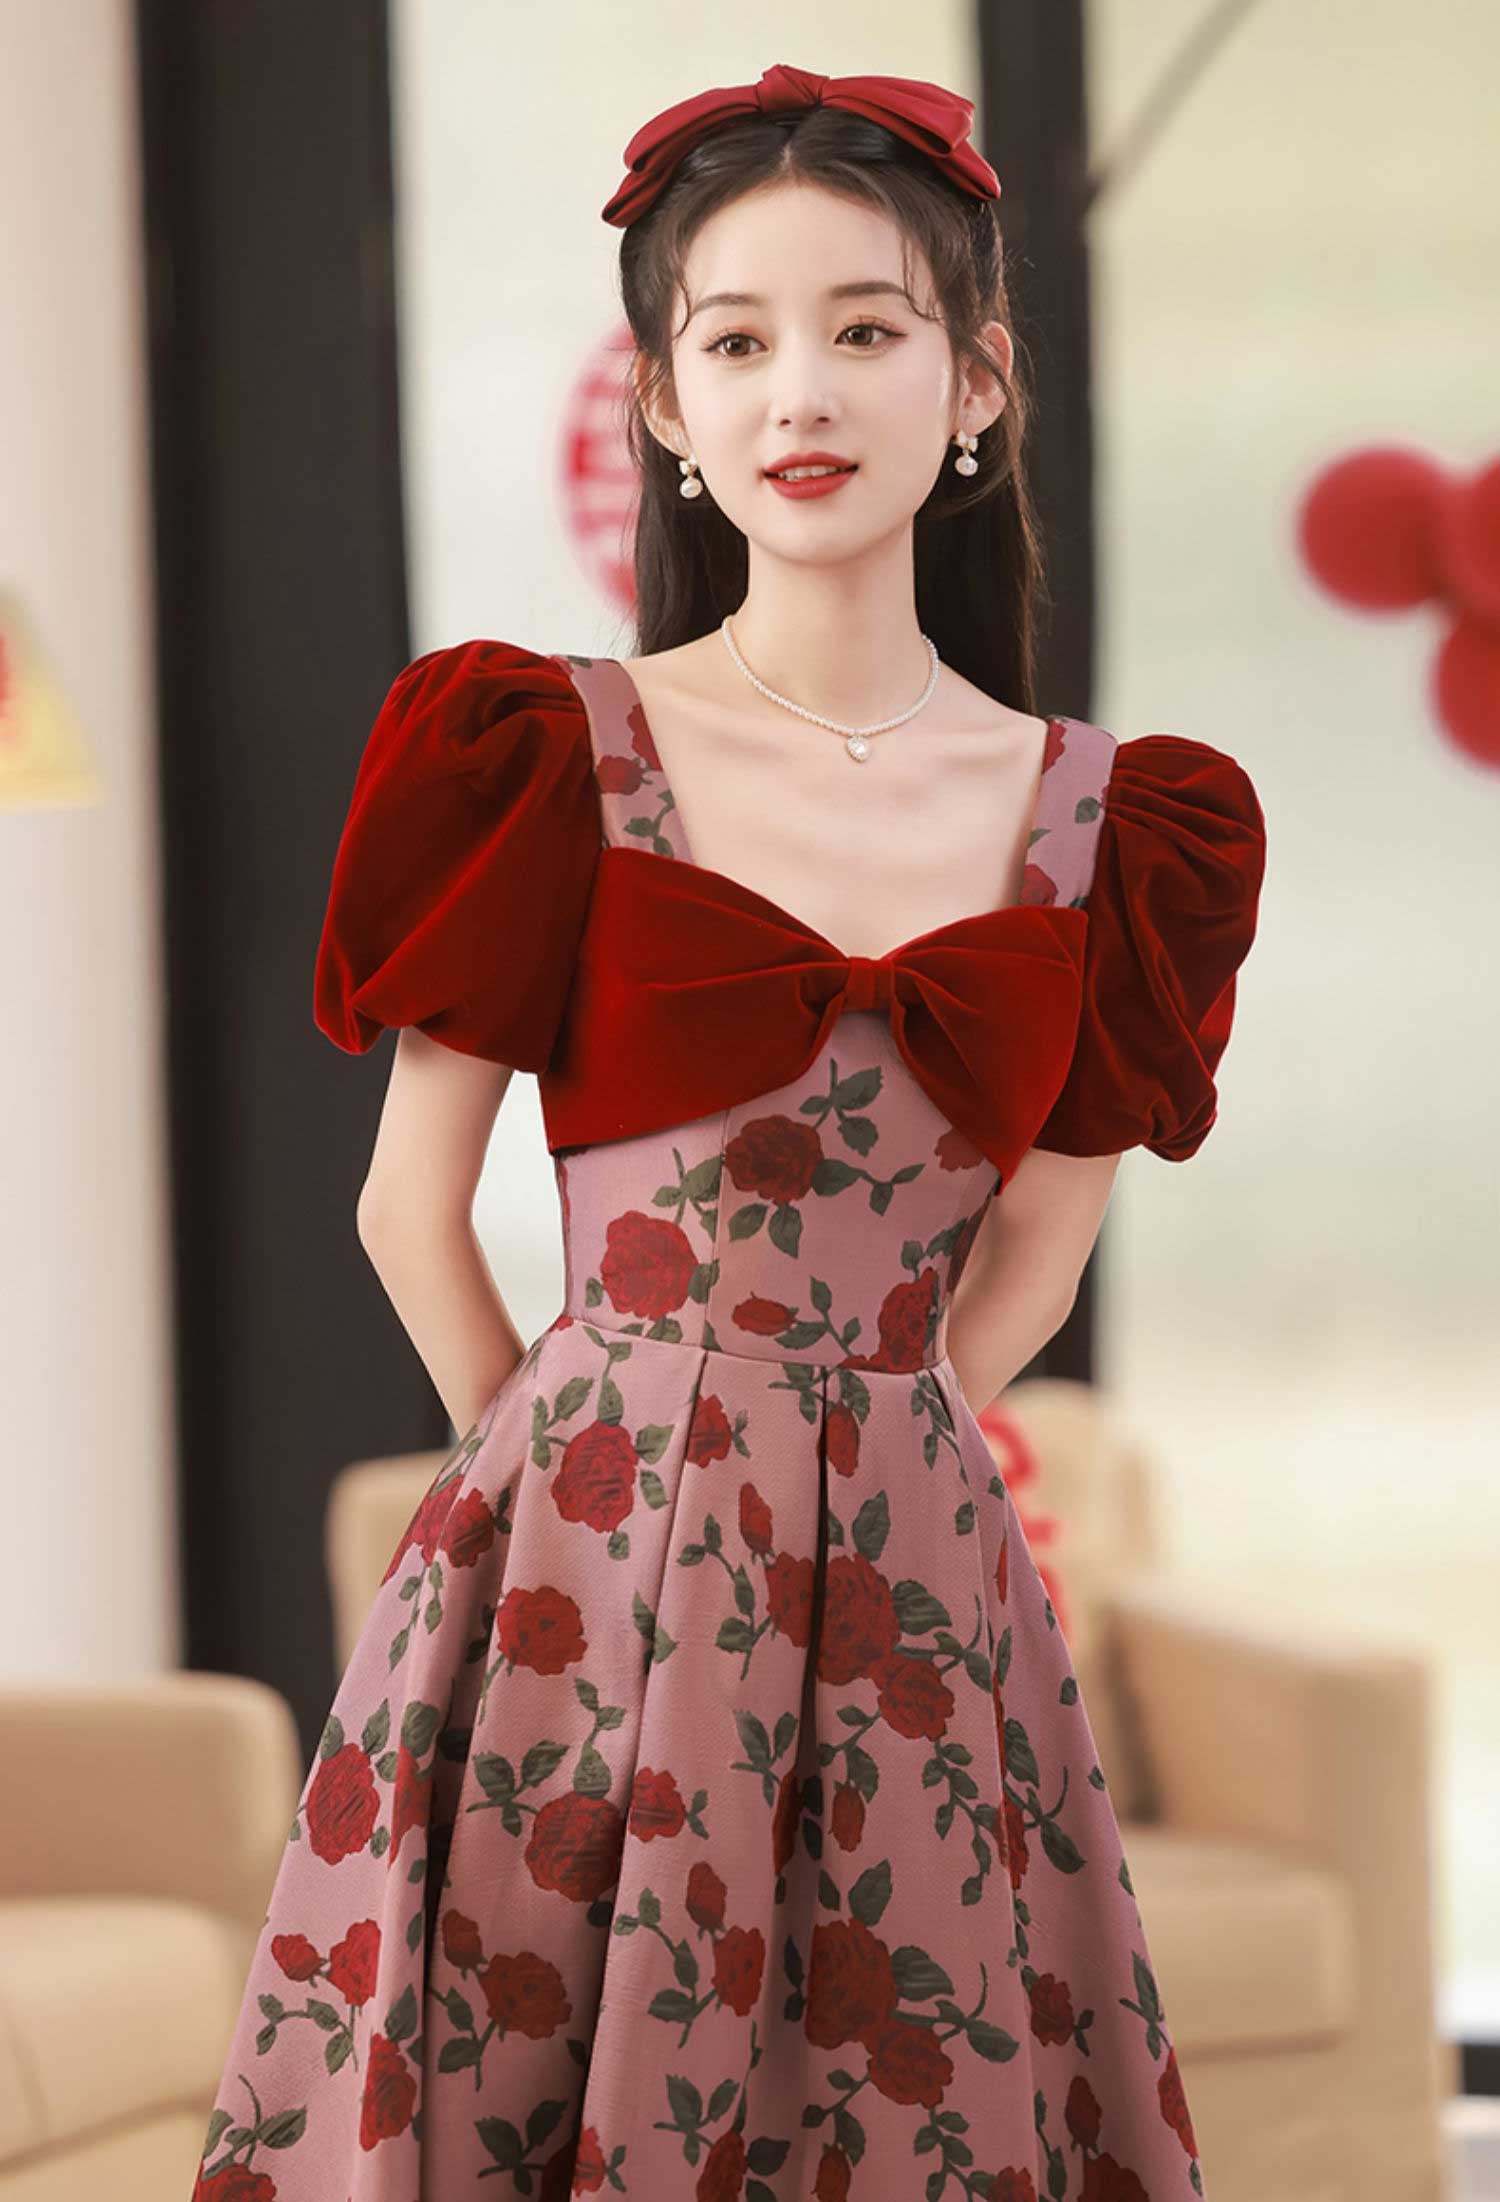 Aesthetic-Floral-Short-Sleeve-Mid-Length-Cocktail-Banquet-Party-Dress07